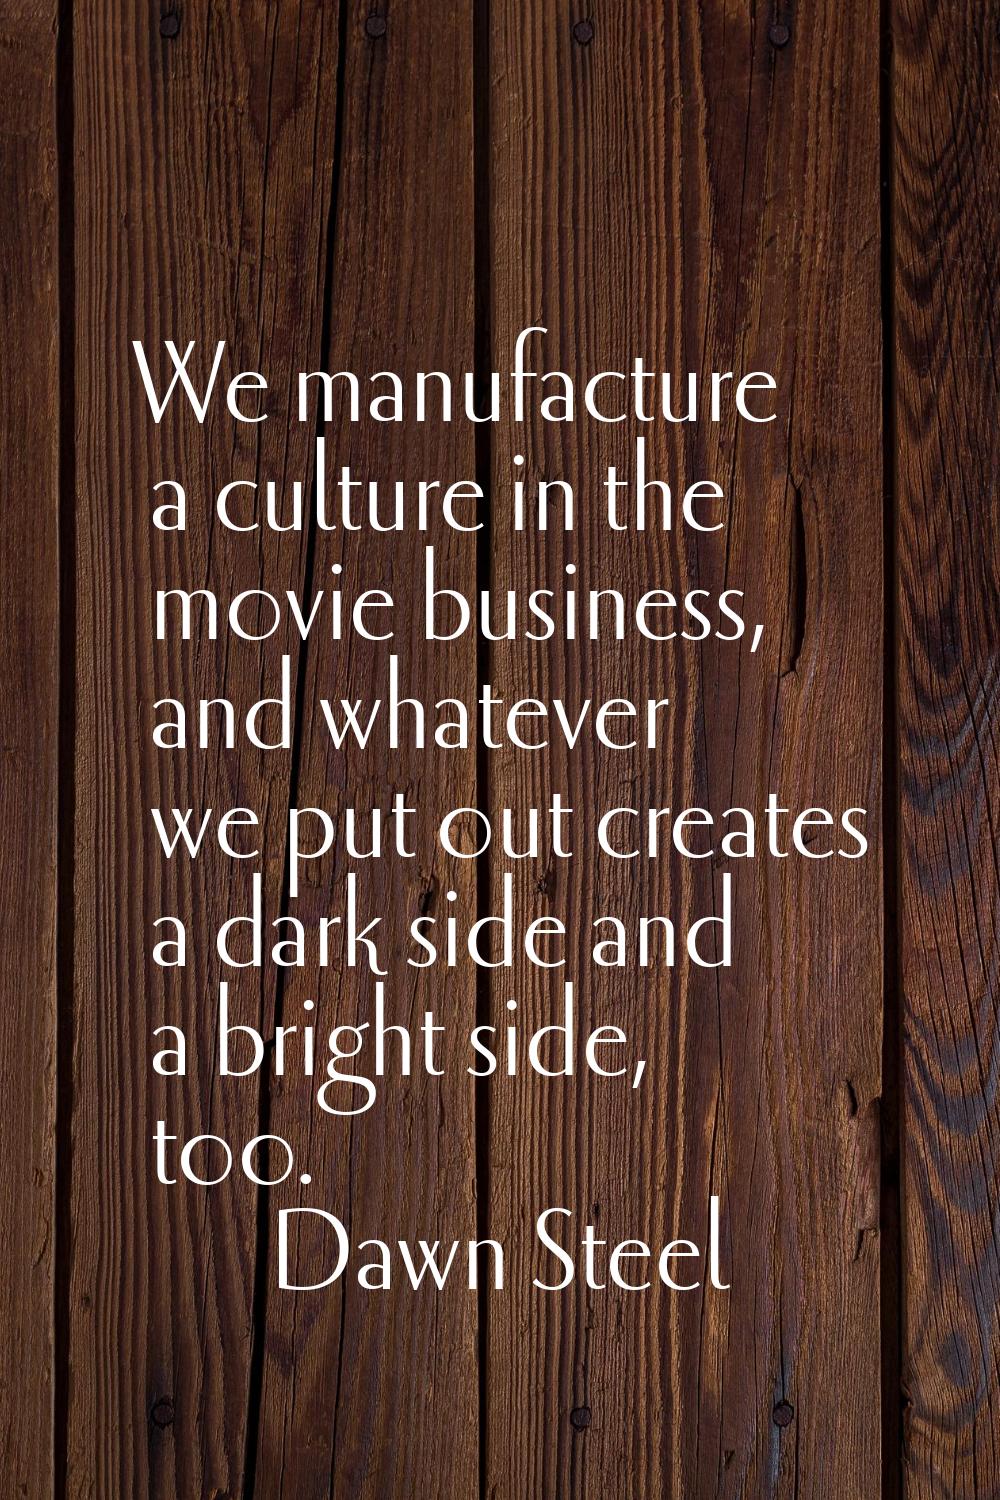 We manufacture a culture in the movie business, and whatever we put out creates a dark side and a b